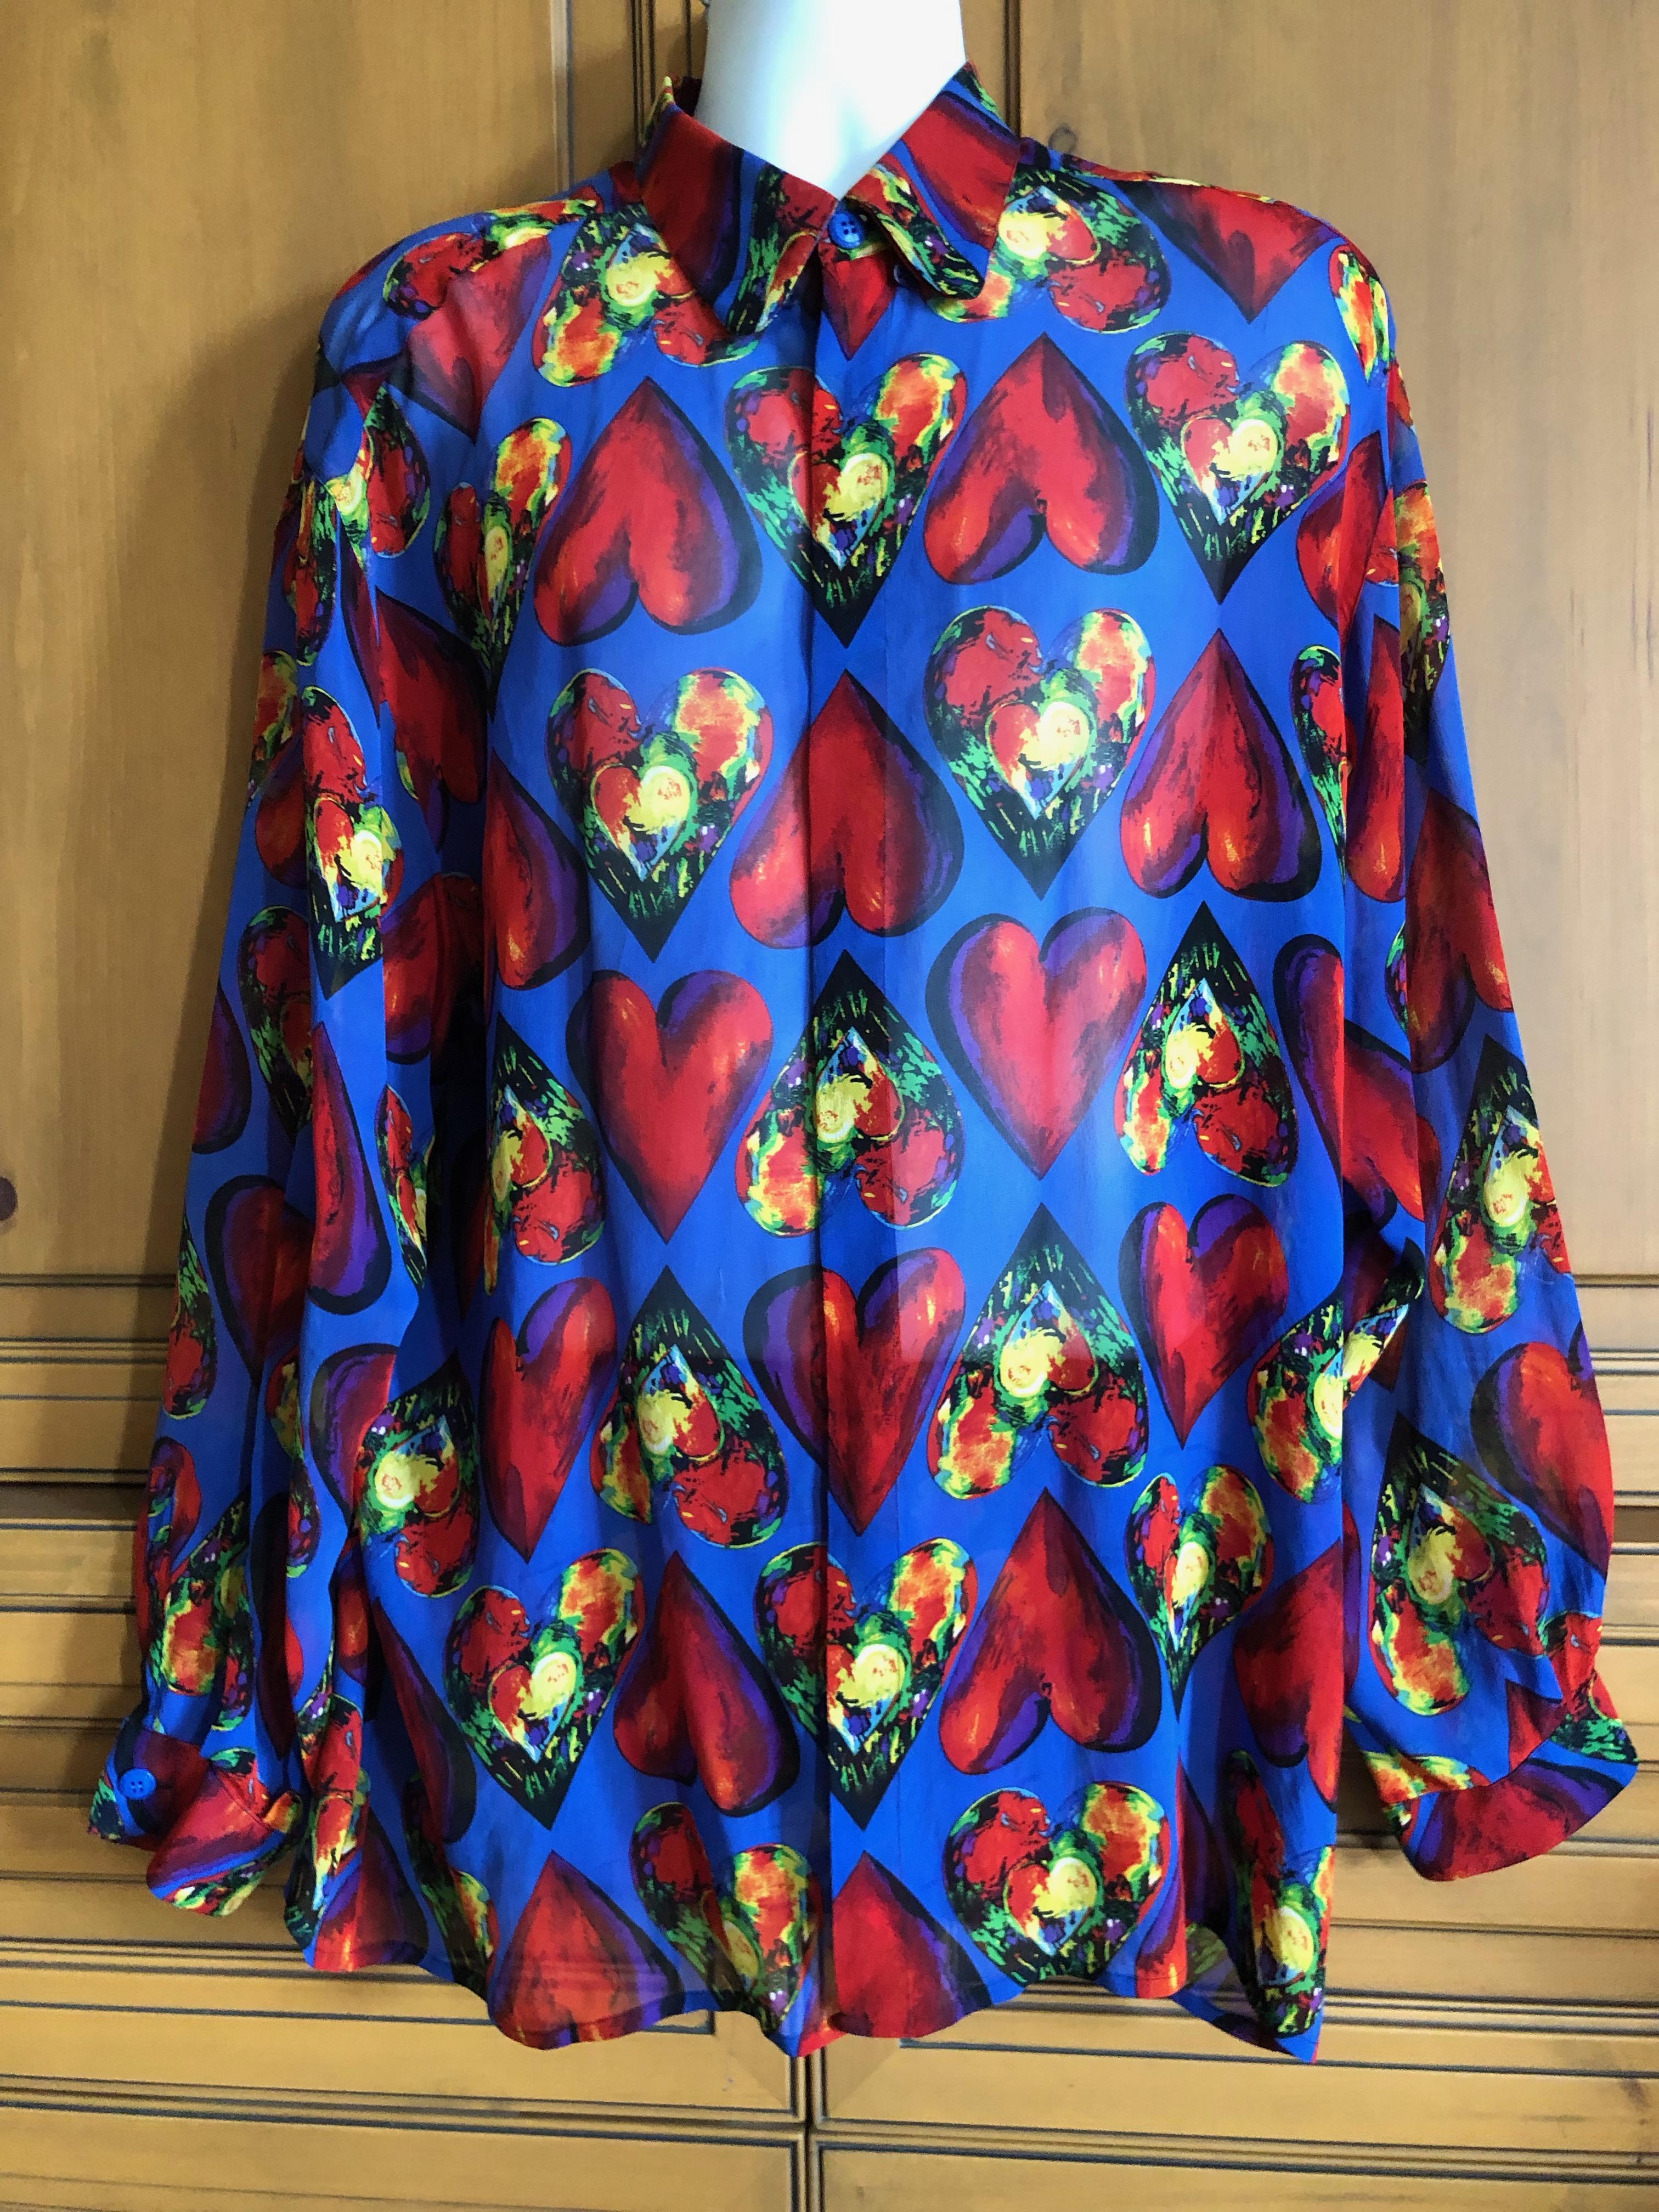 Gianni Versace Couture Men’s Sheer Silk Shirt 1997 Jim Dine Heart Print
This is such a beautiful piece a classic. Original buttons are intact.
Marked size 56, but runs very large, more like XXL
Measurements ;
Chest 55